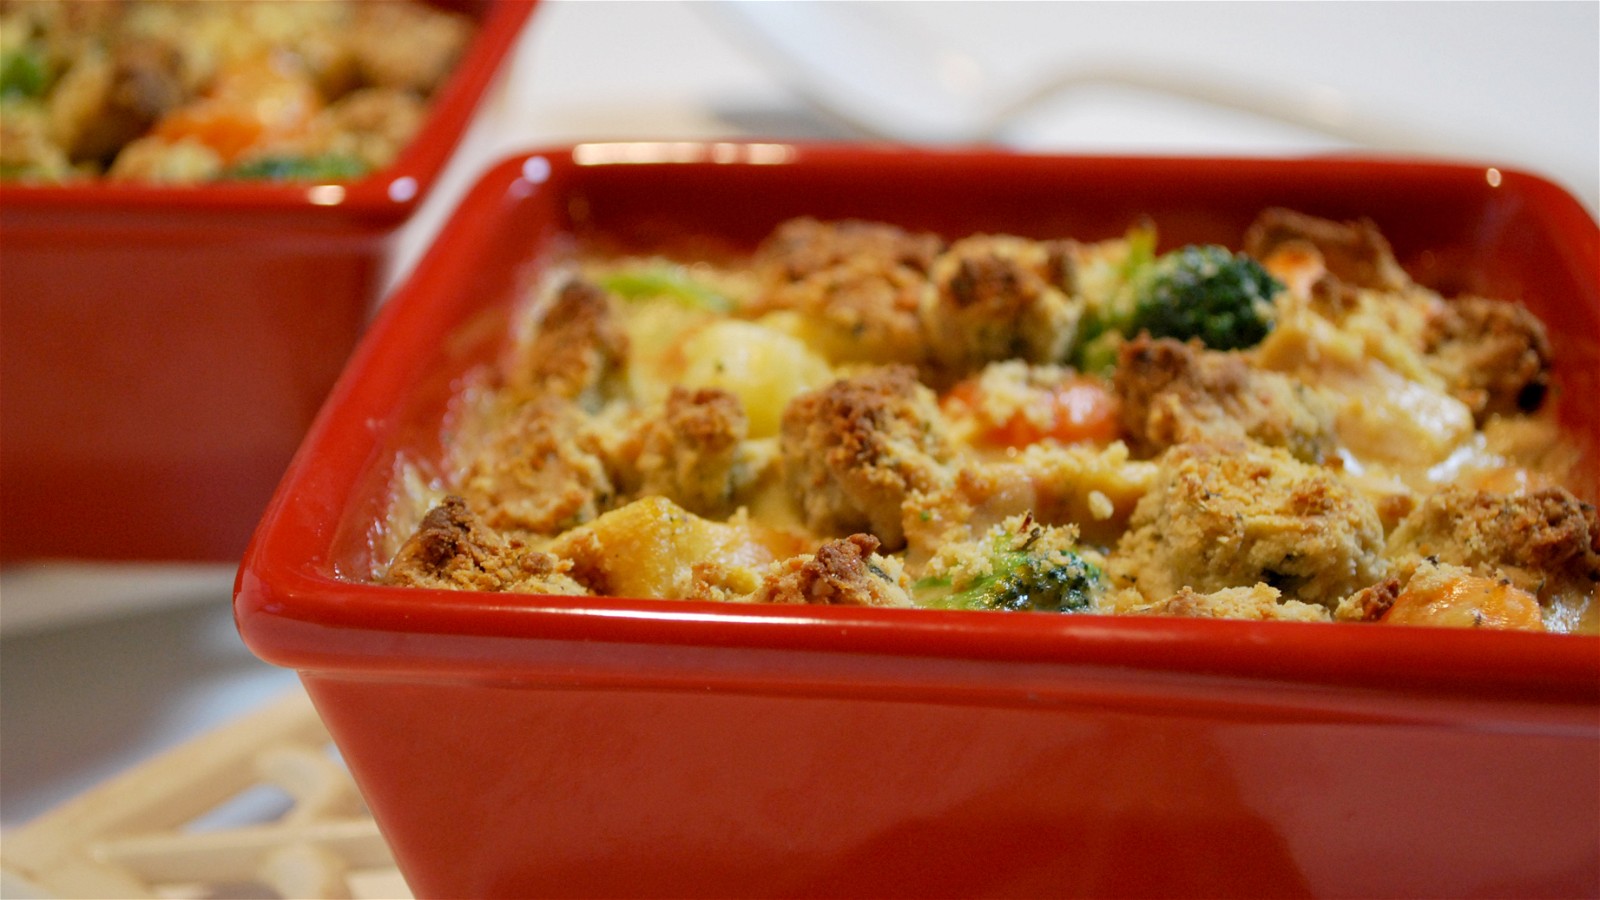 Image of Cheesy Chicken Crumble